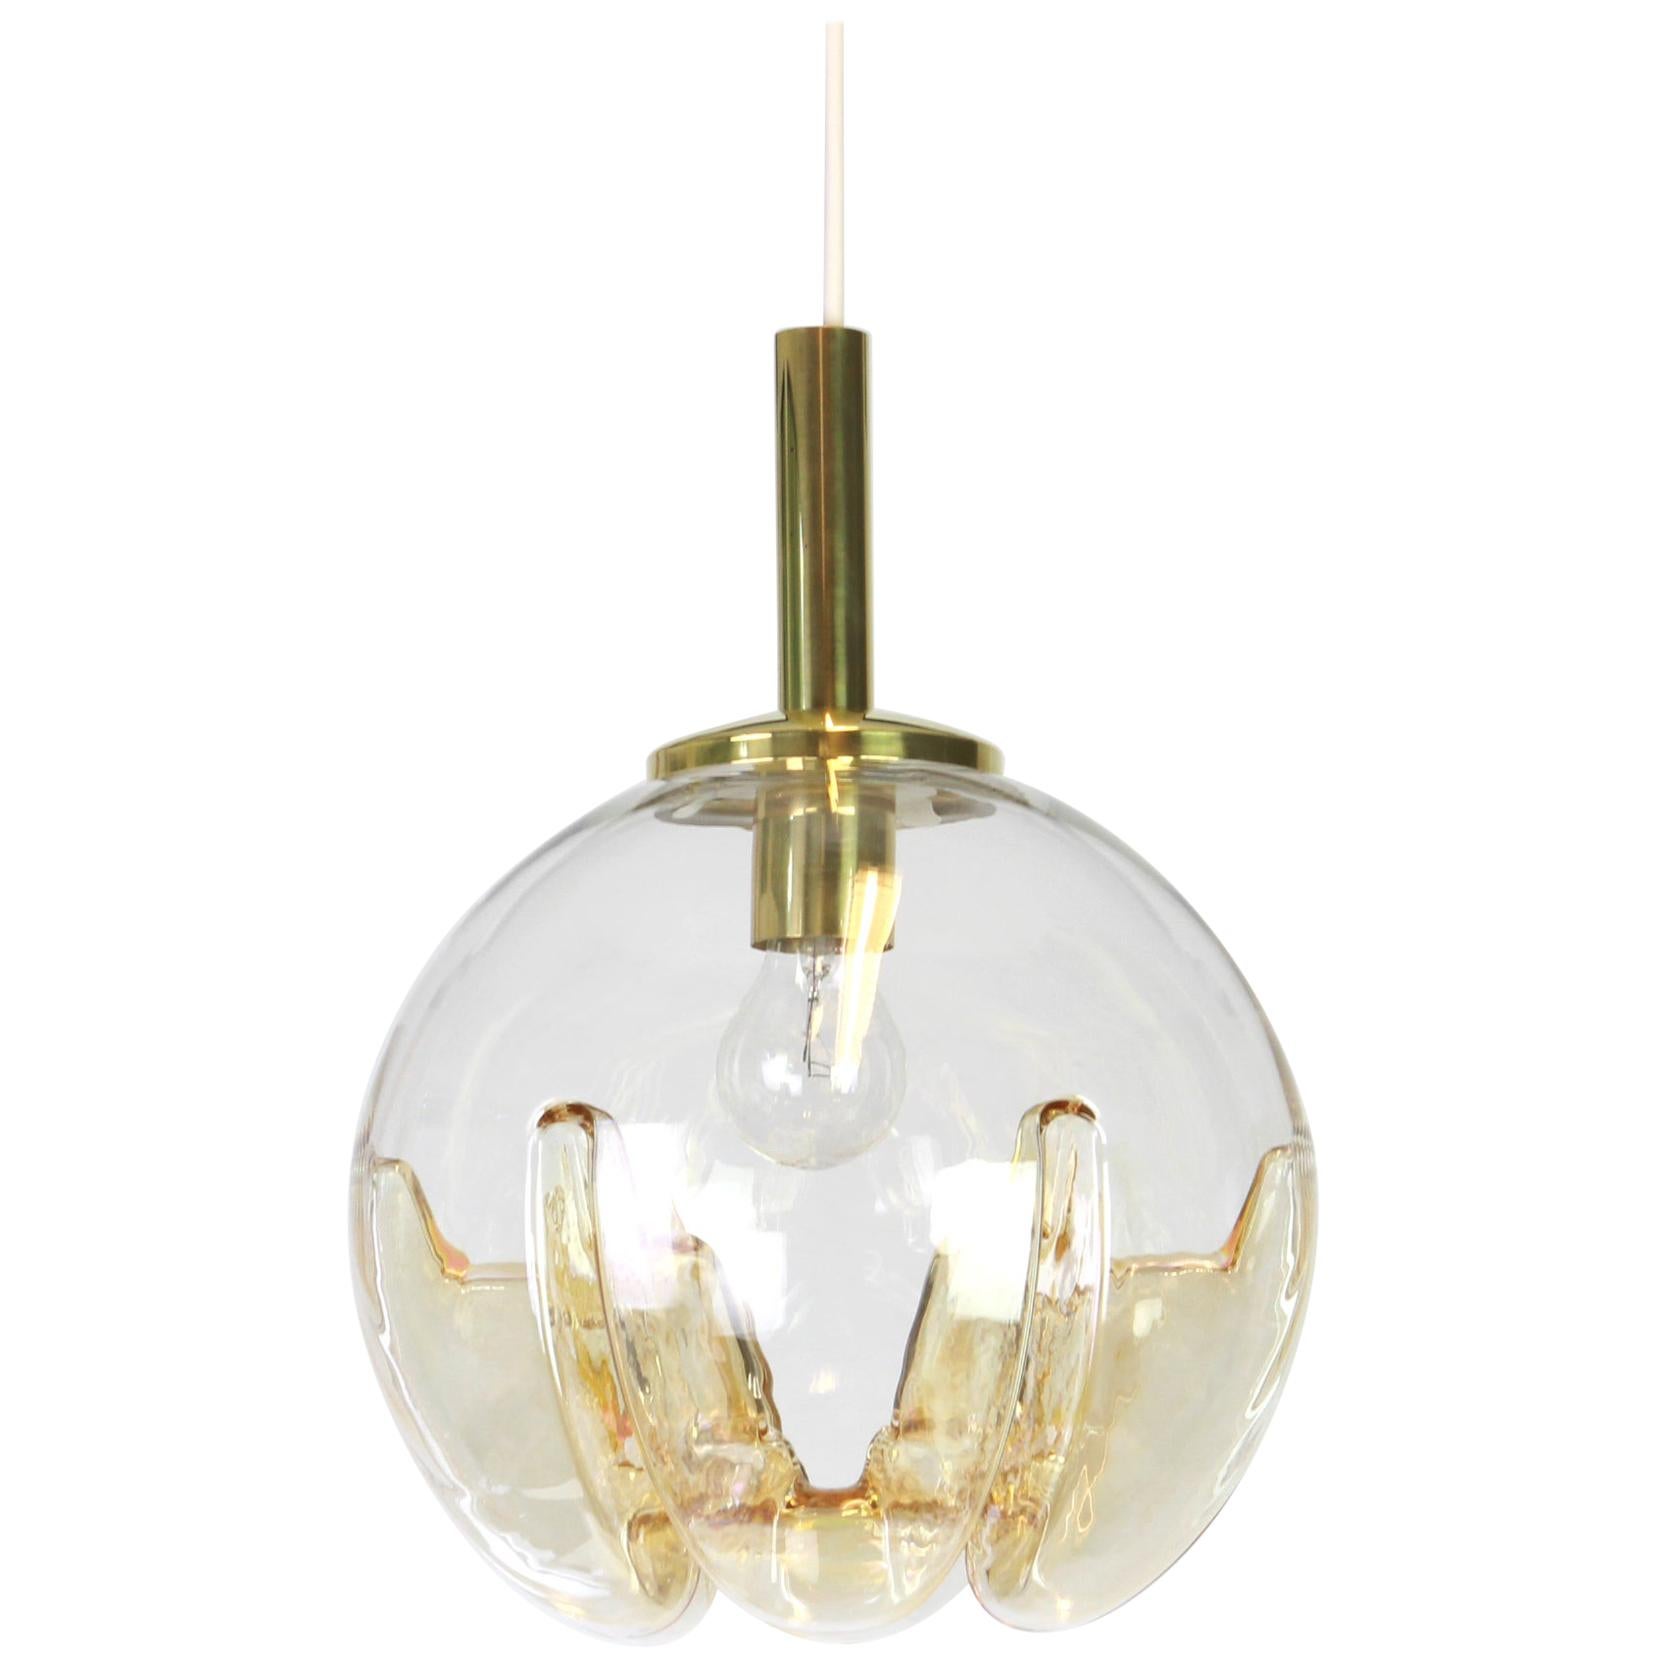 1 of 2 Murano Ball Pendant Light by Doria, Germany, 1970s For Sale